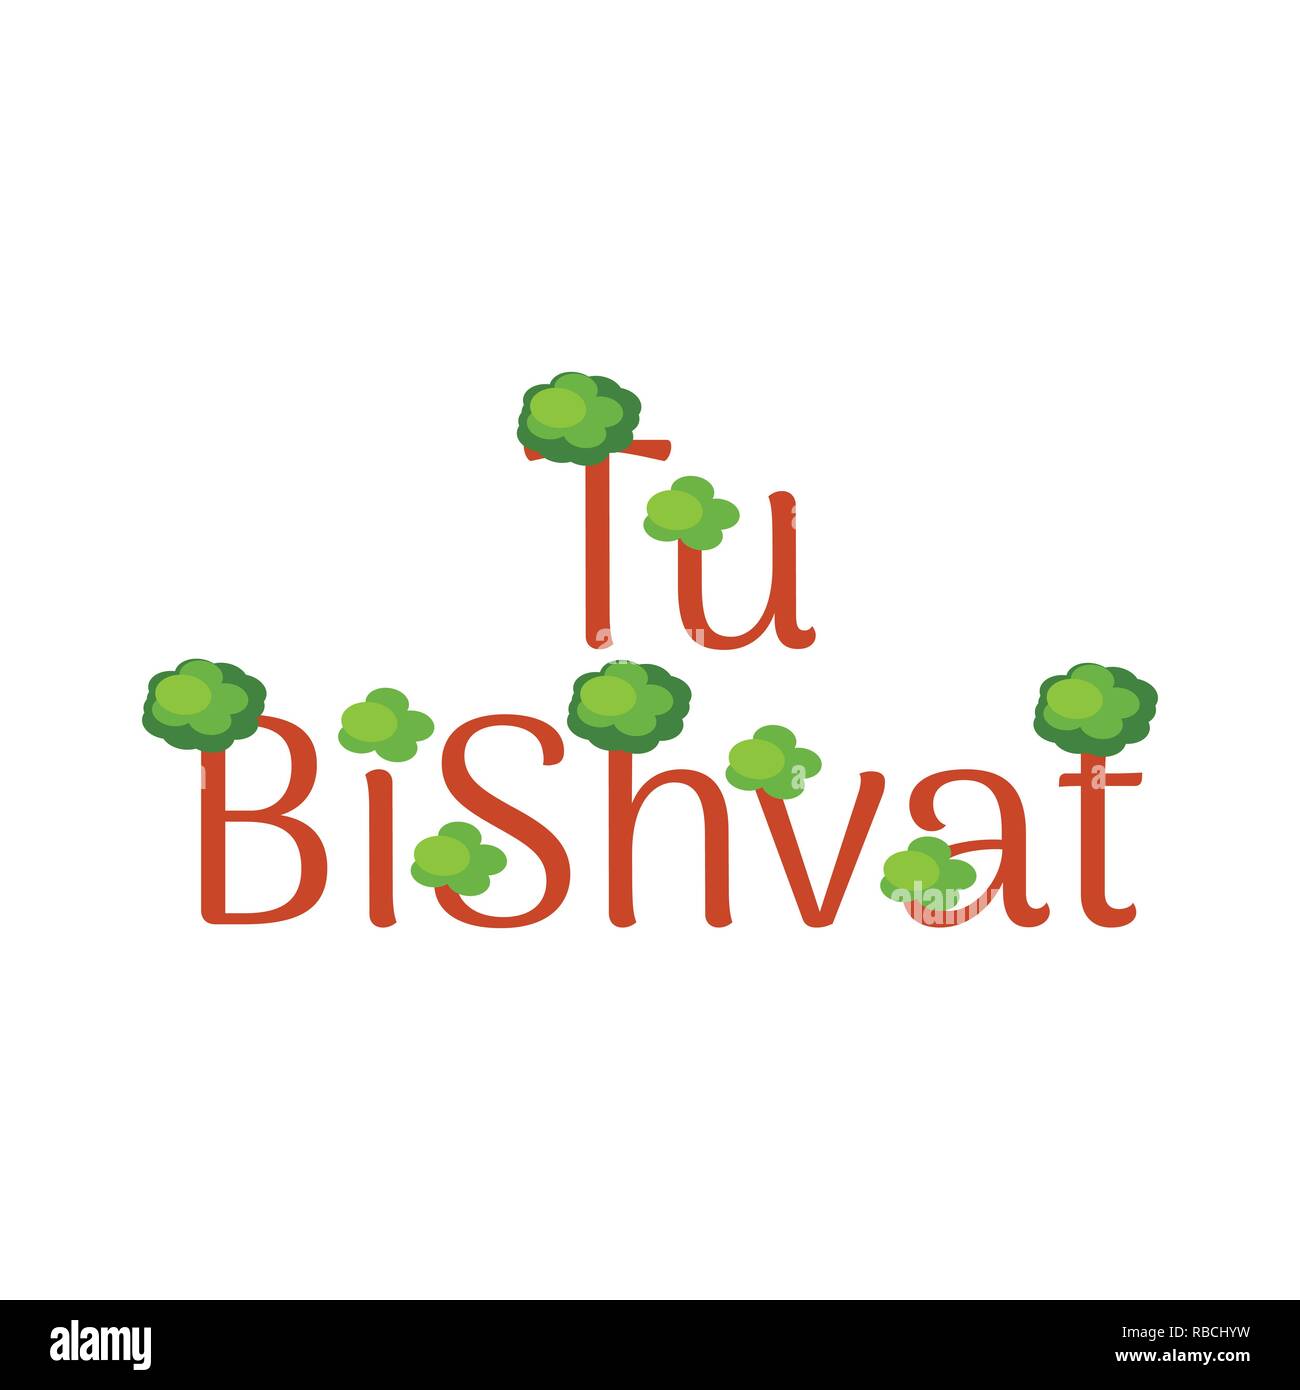 Tu BiShvat. Jewish festival of fruit trees. Event name - trees with green crowns Stock Vector